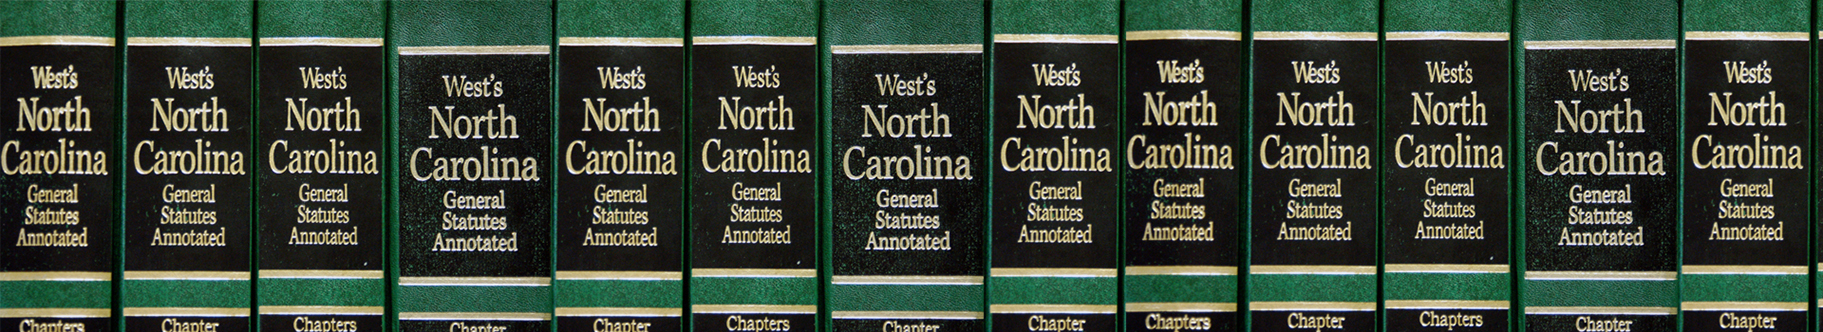 West's North Carolina General Statutes Annotated books on a shelf